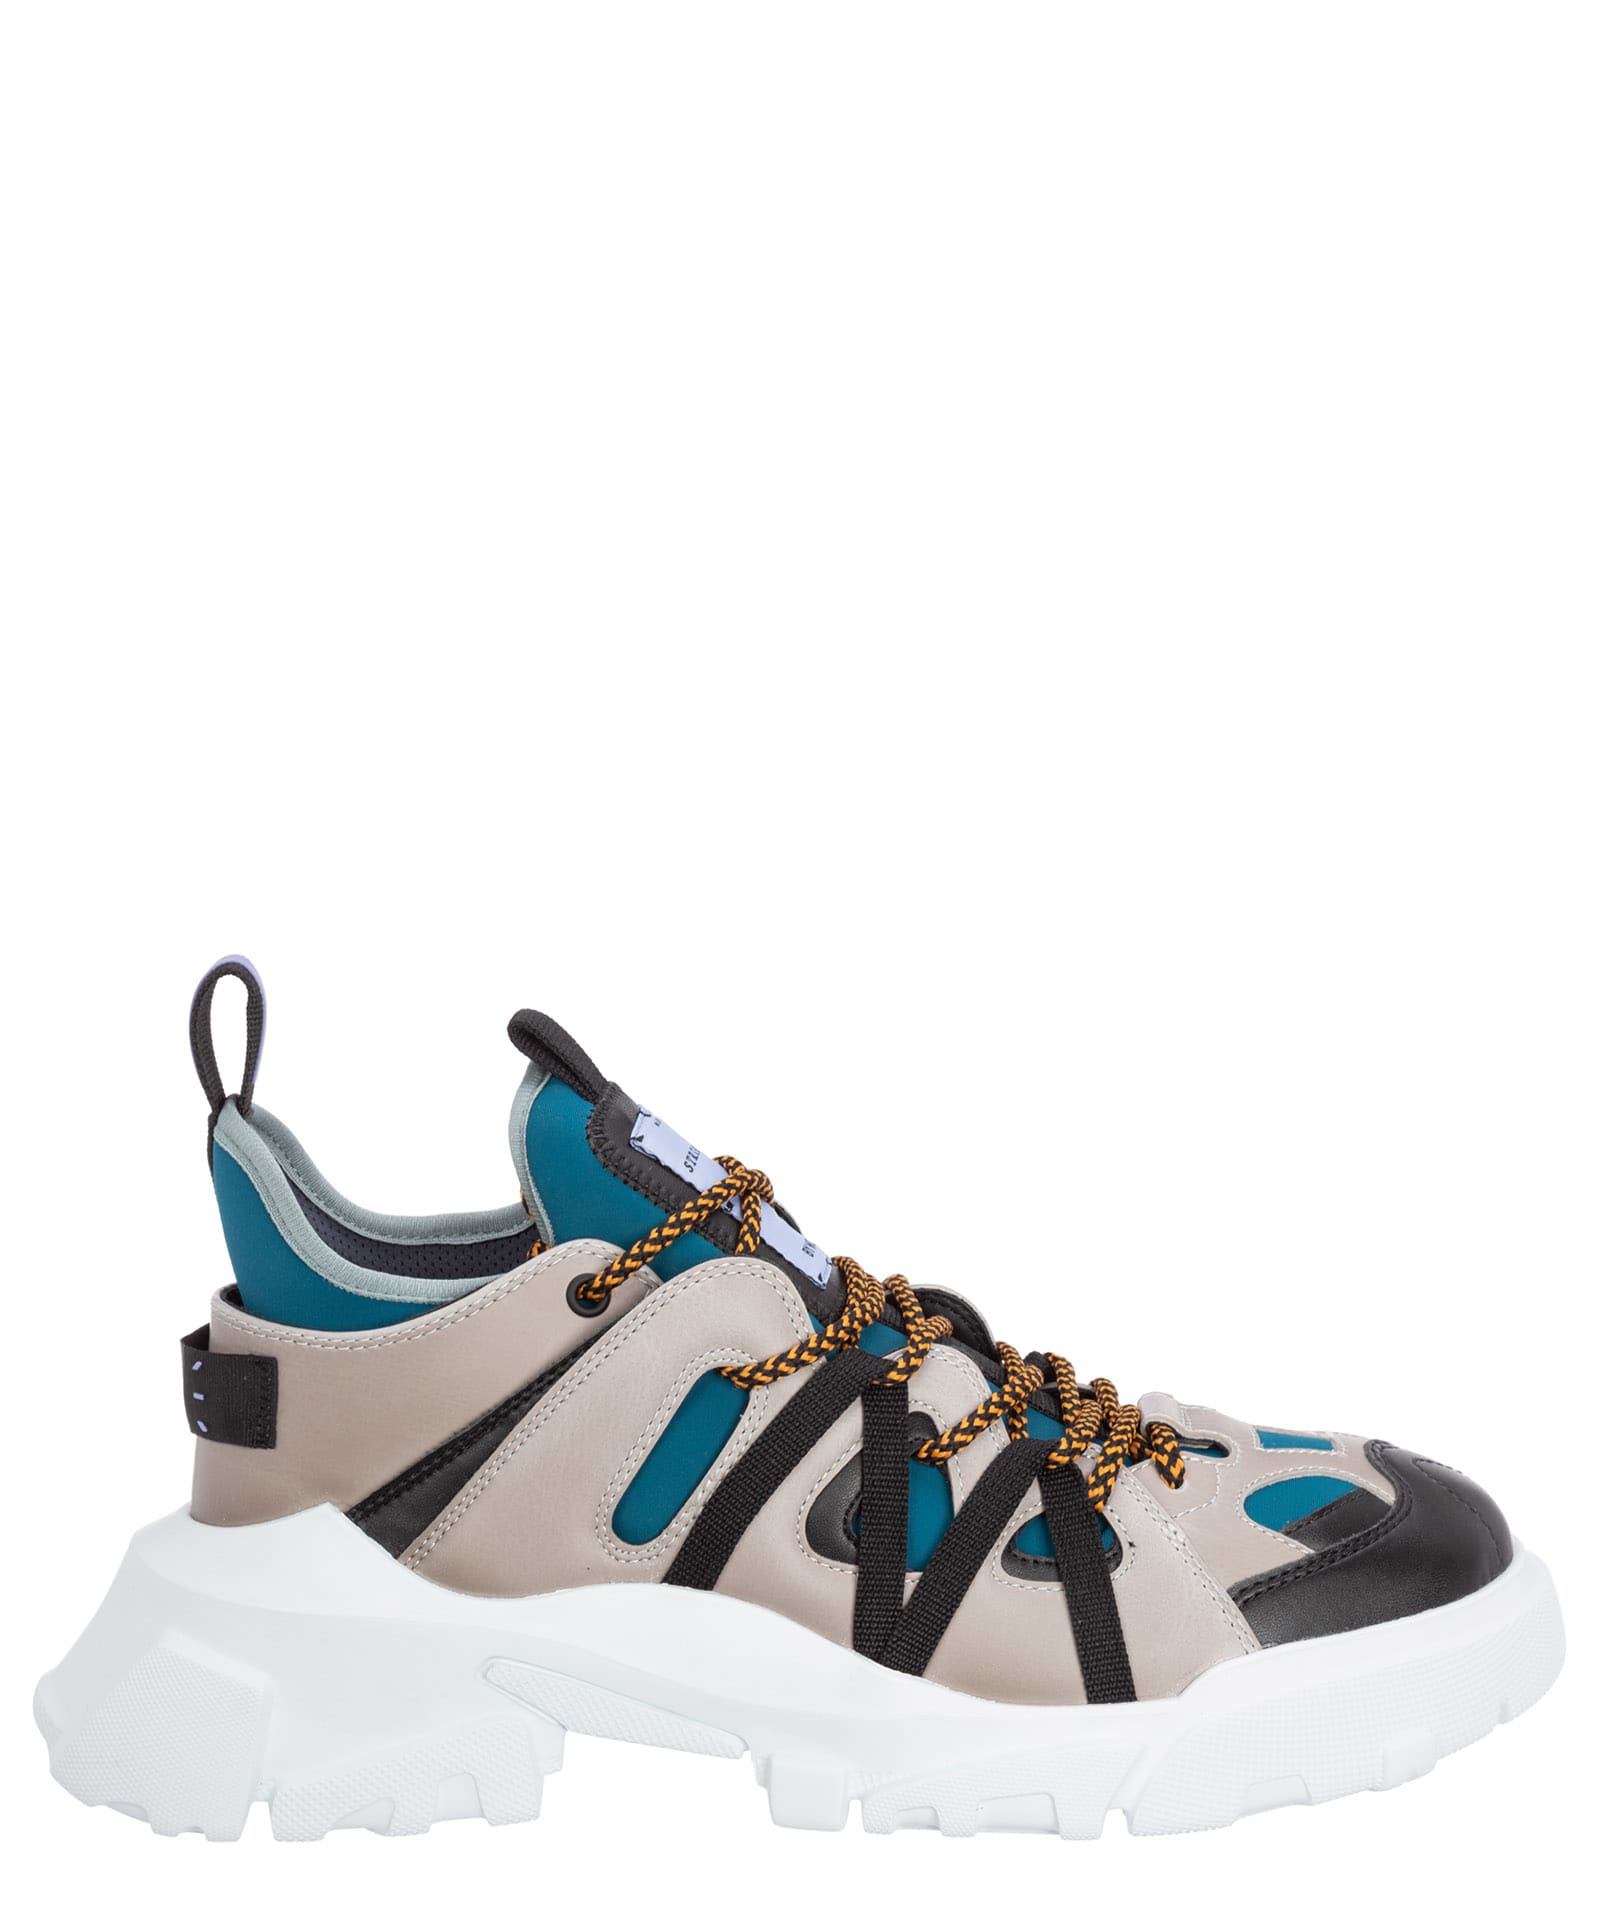 McQ Alexander McQueen Striae Orbyt 2.0 Leather Sneakers